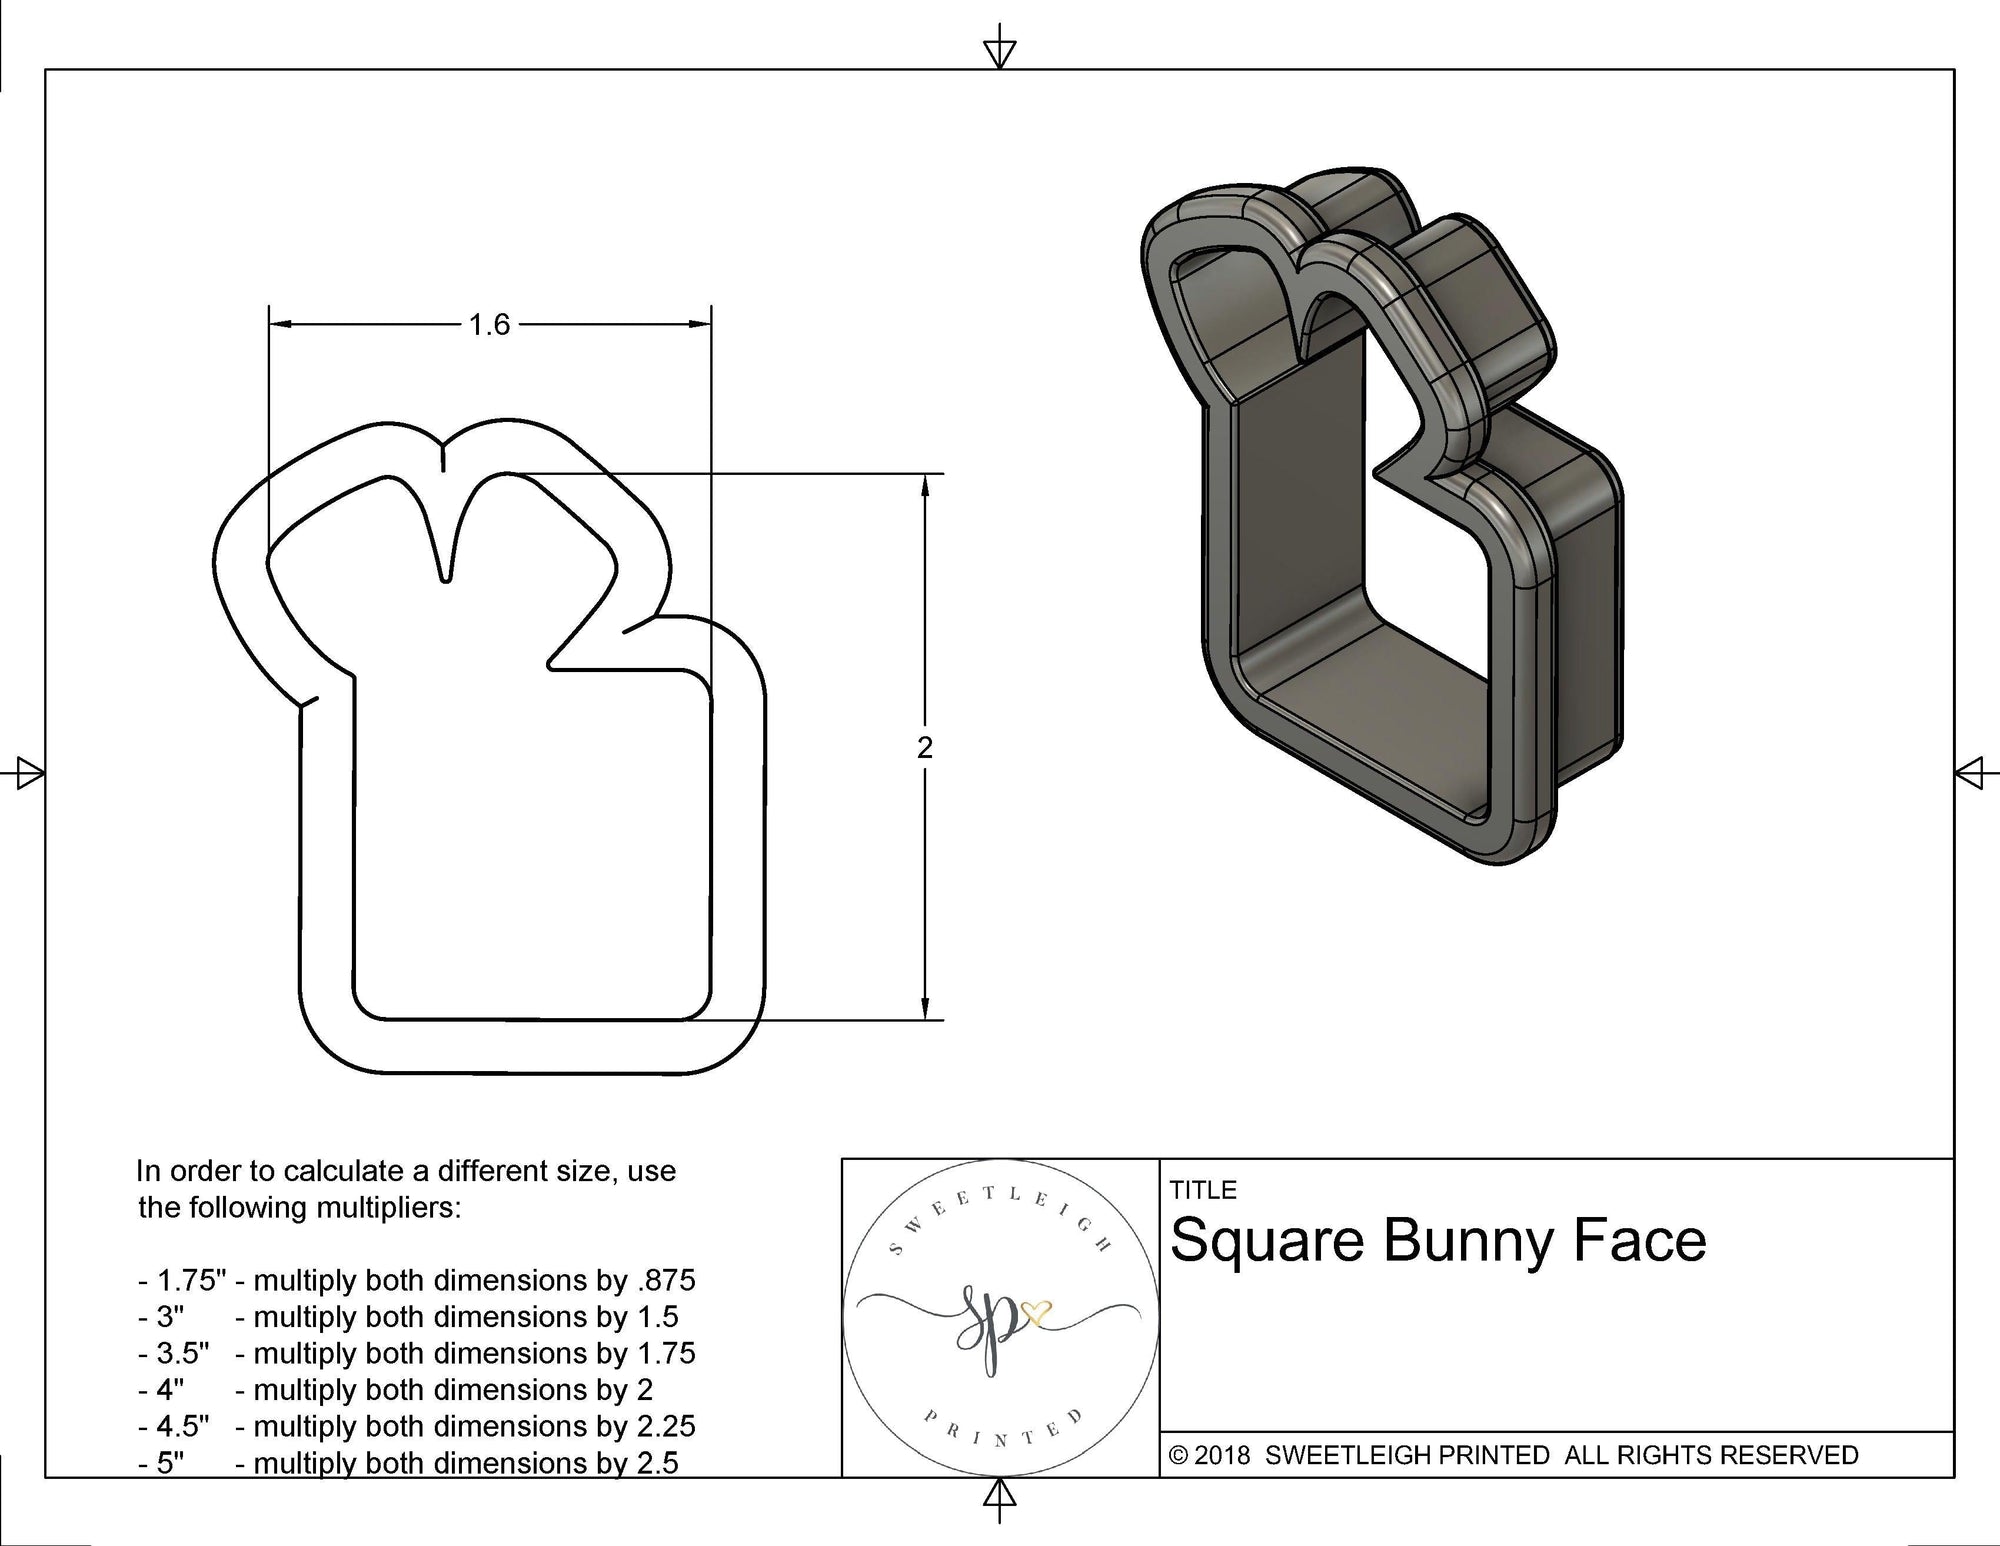 Square Bunny Face Cookie Cutter - Sweetleigh 